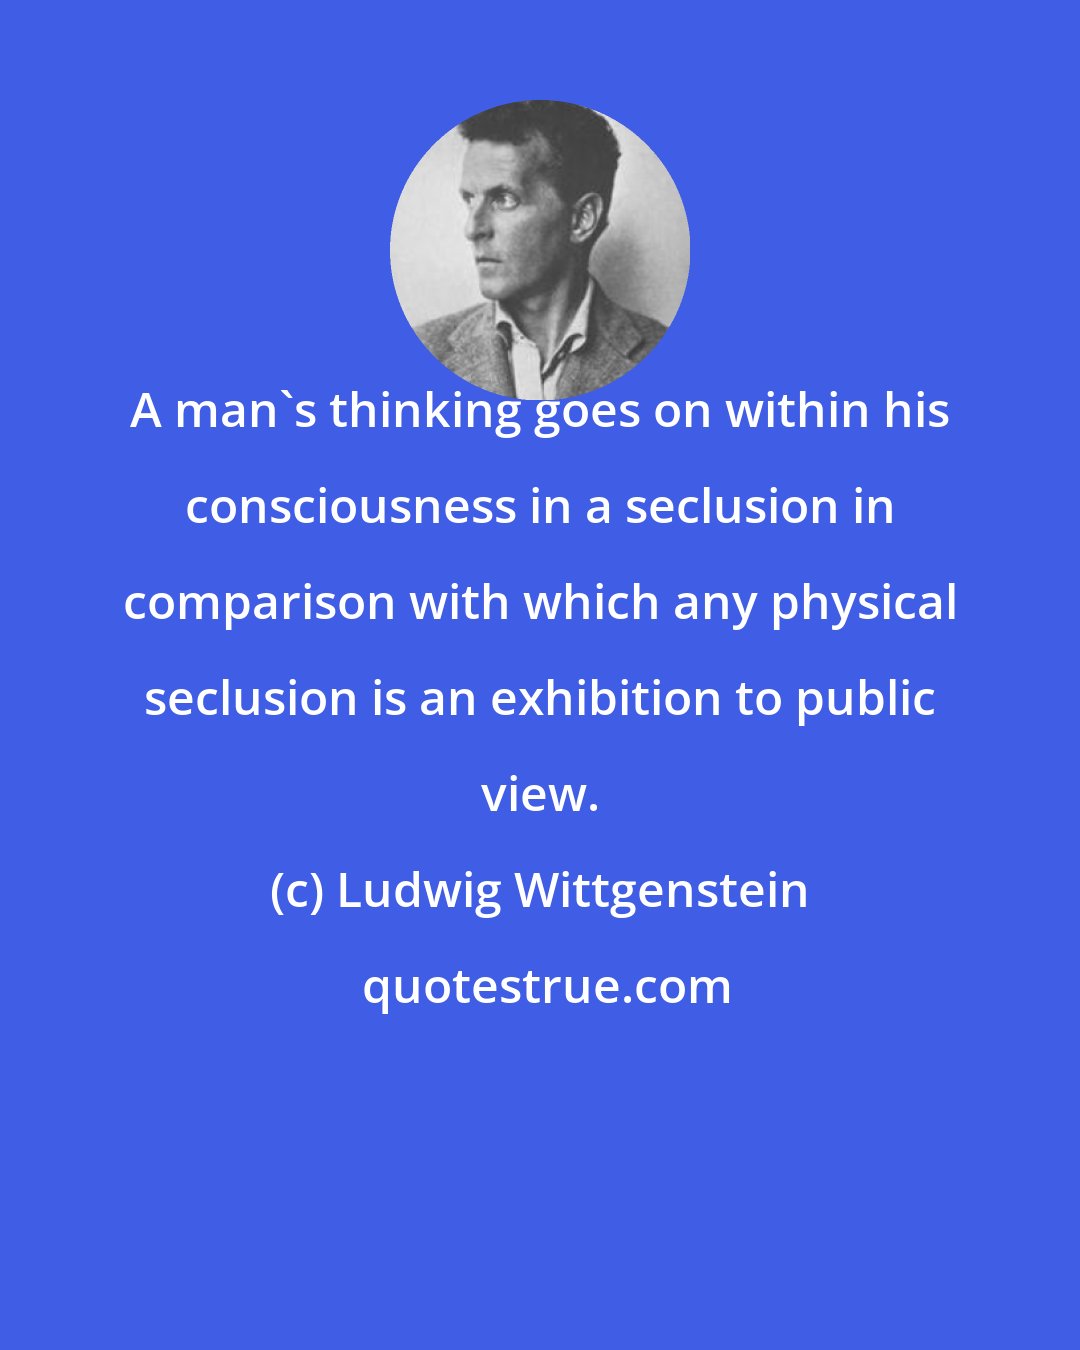 Ludwig Wittgenstein: A man's thinking goes on within his consciousness in a seclusion in comparison with which any physical seclusion is an exhibition to public view.